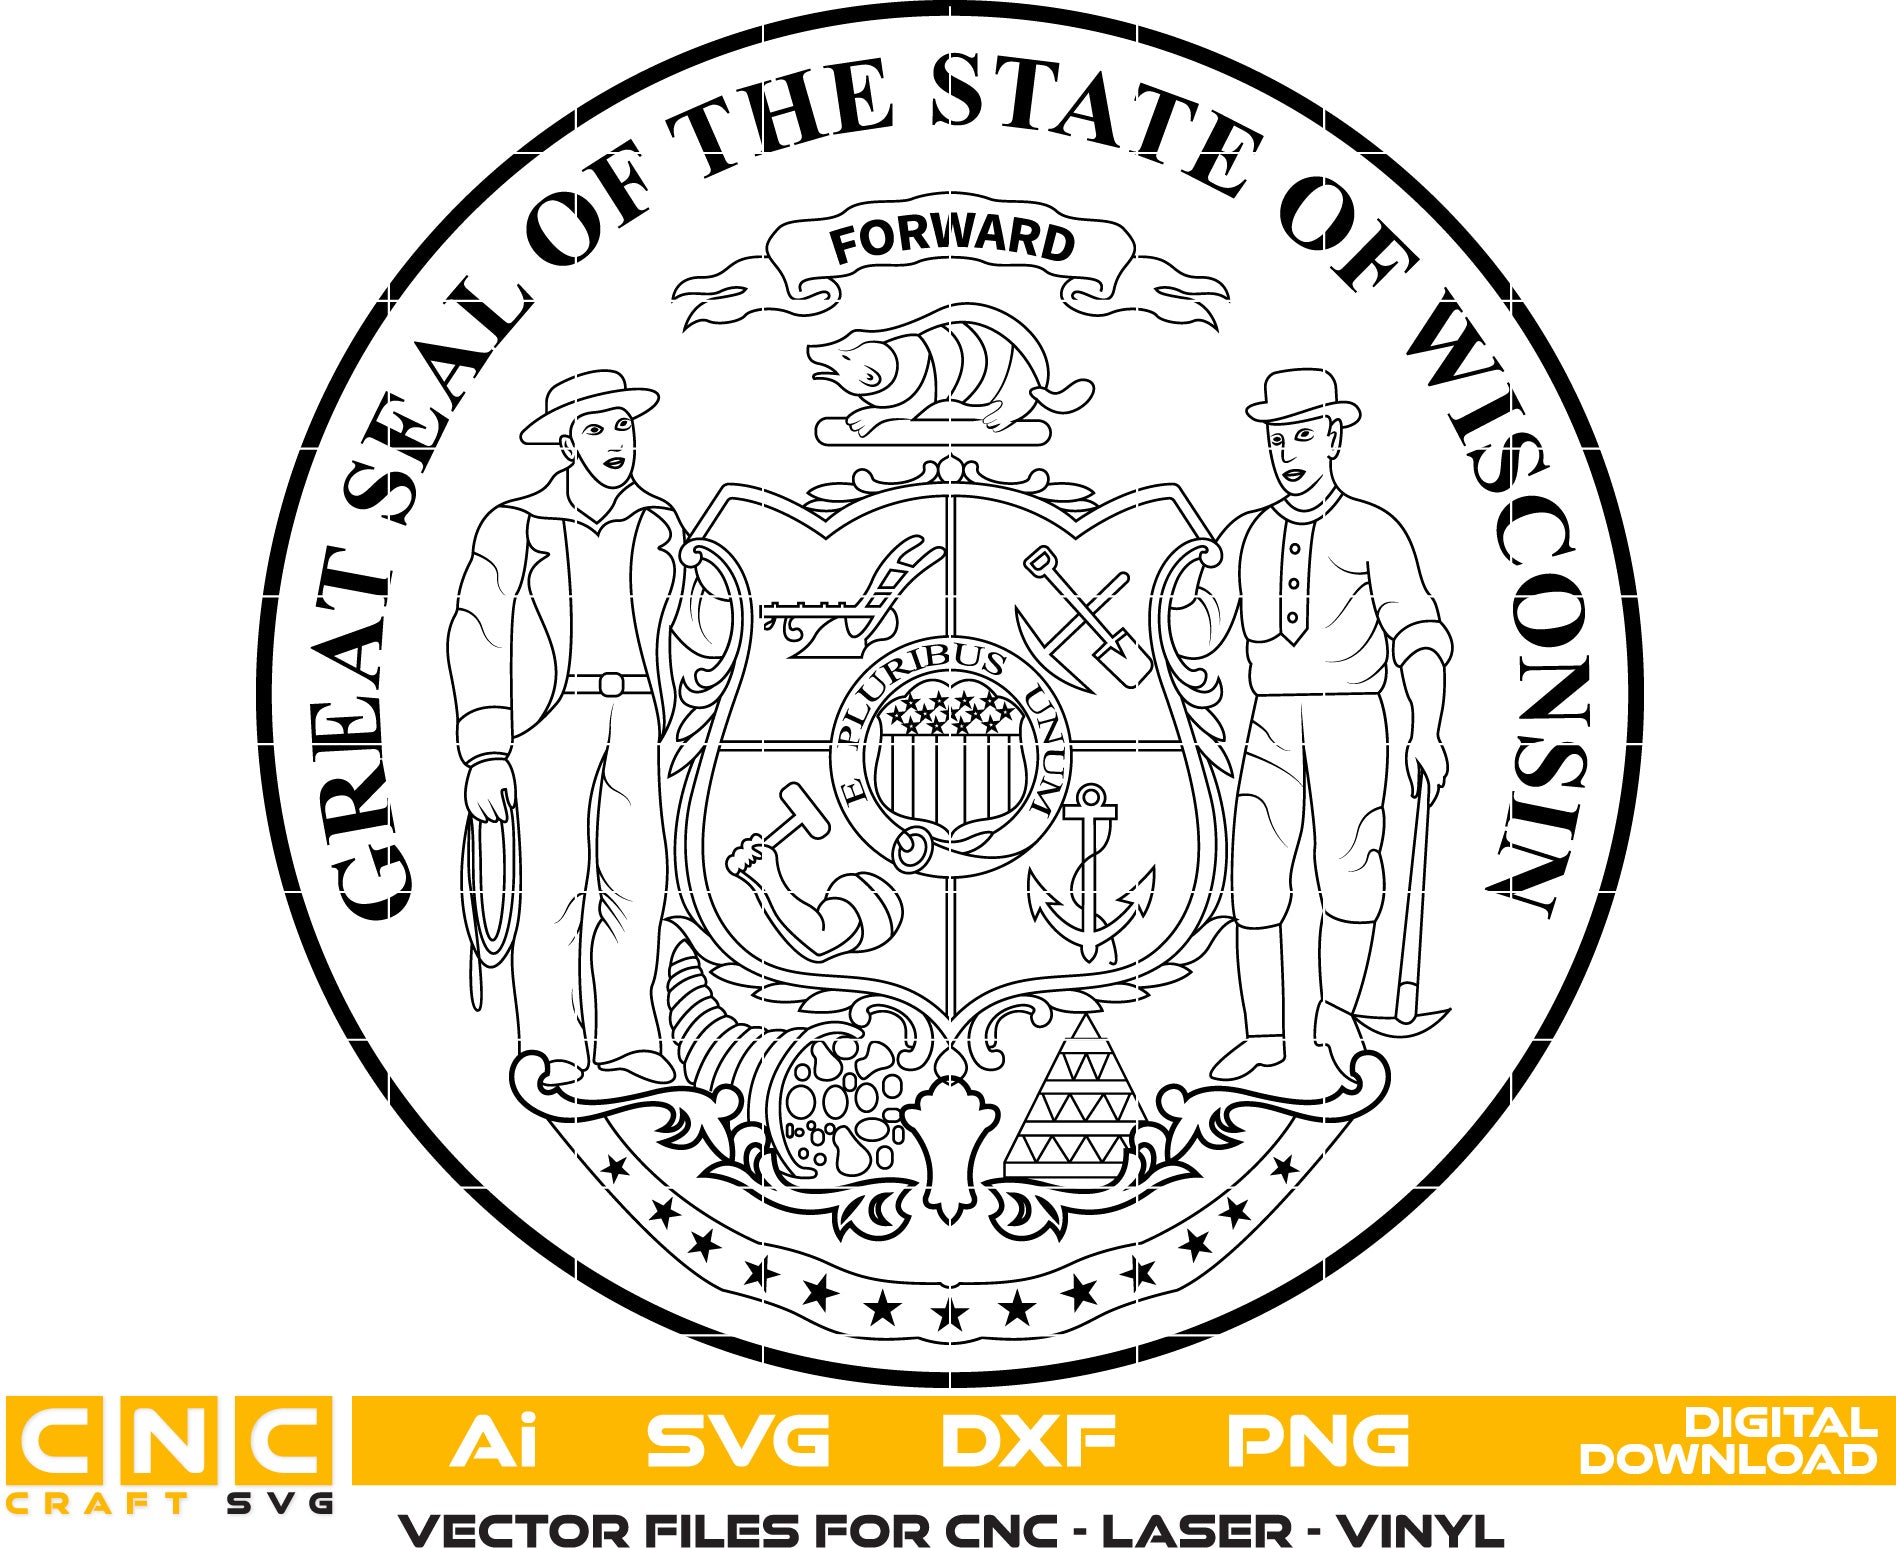 State of Wisconsin Seal Vector art Svg,Dxf,Jpg,Png & Ai files for Engraving, woodworking and Printing